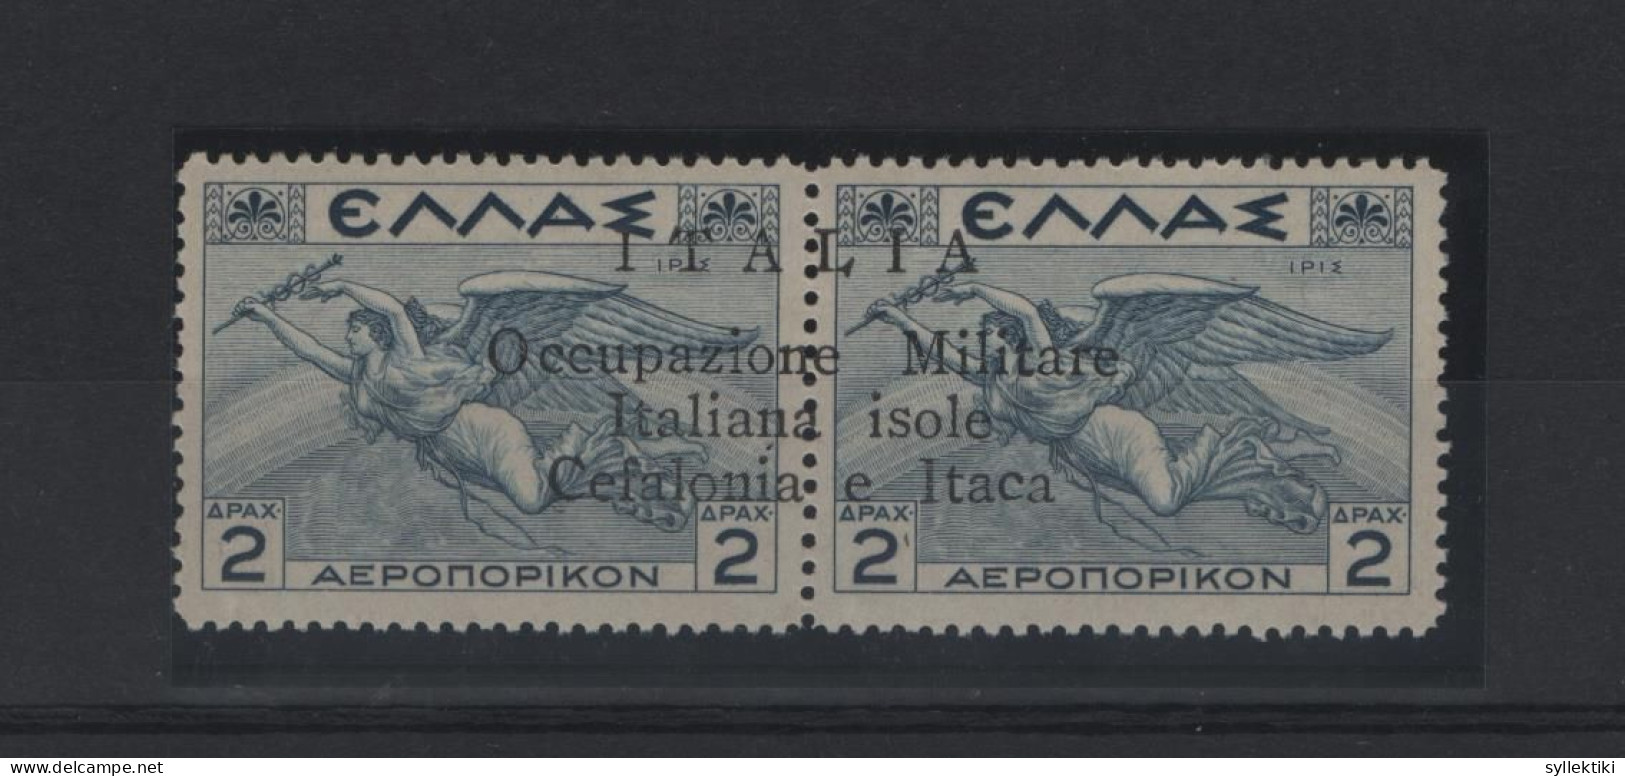 GREECE IONIAN ISLANDS 1941 2 DRACHMAS MNH STAMP IN PAIR MYTHOLOGICAL ISSUE OVERPRINTED  Occupazione Militare Italiana Is - Ionian Islands